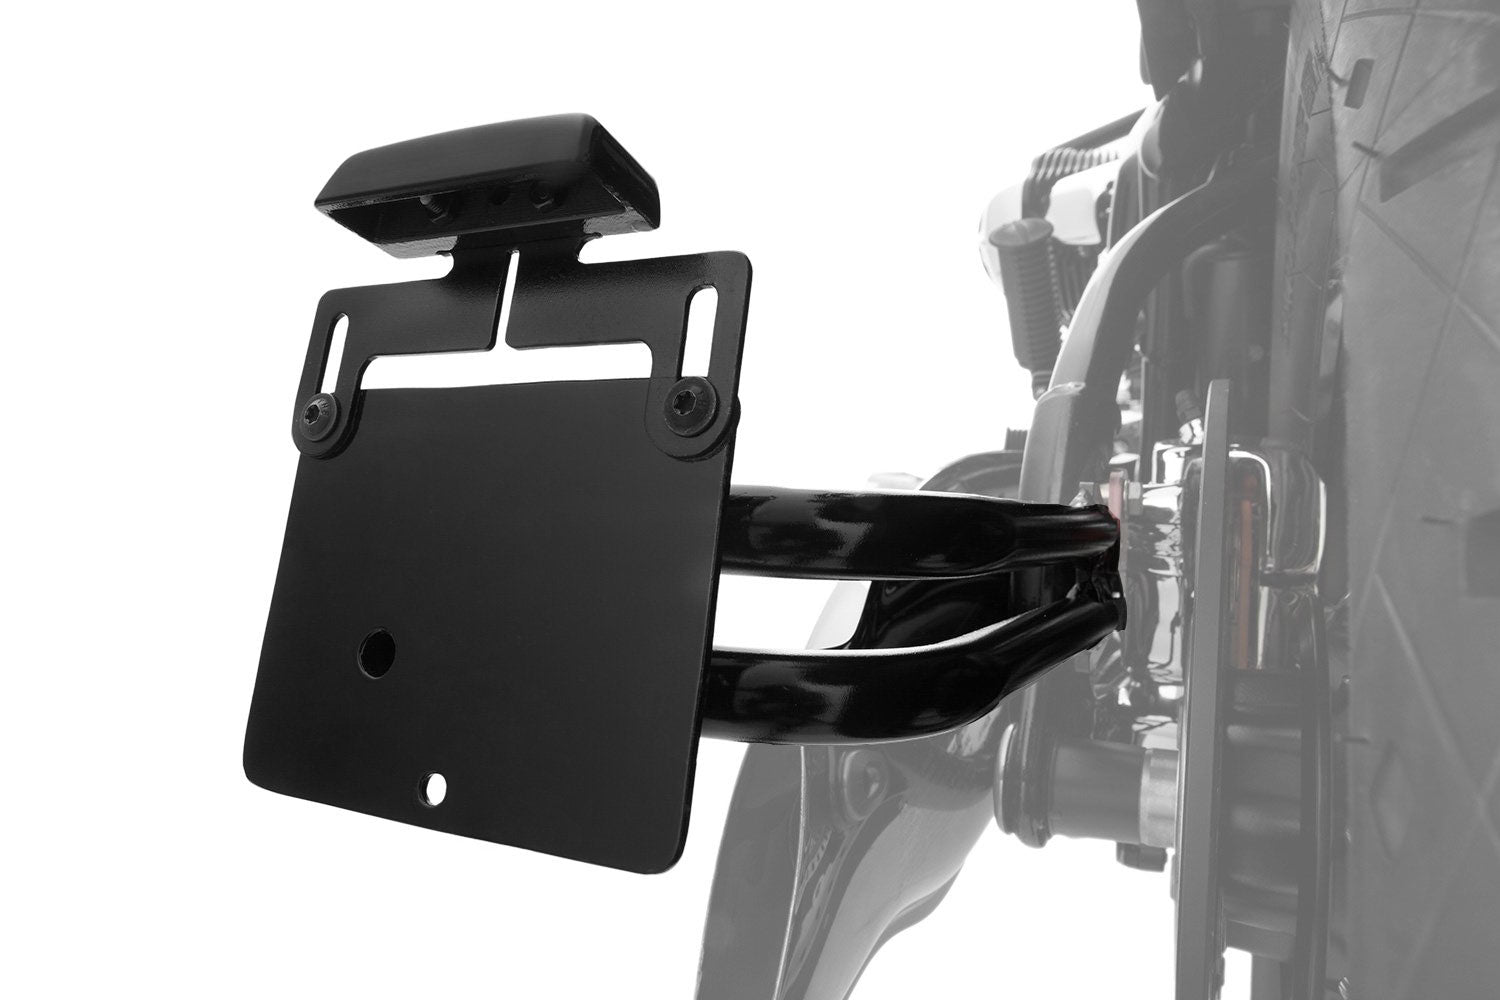 BMW R18 Styling - Liscence Plate Holder